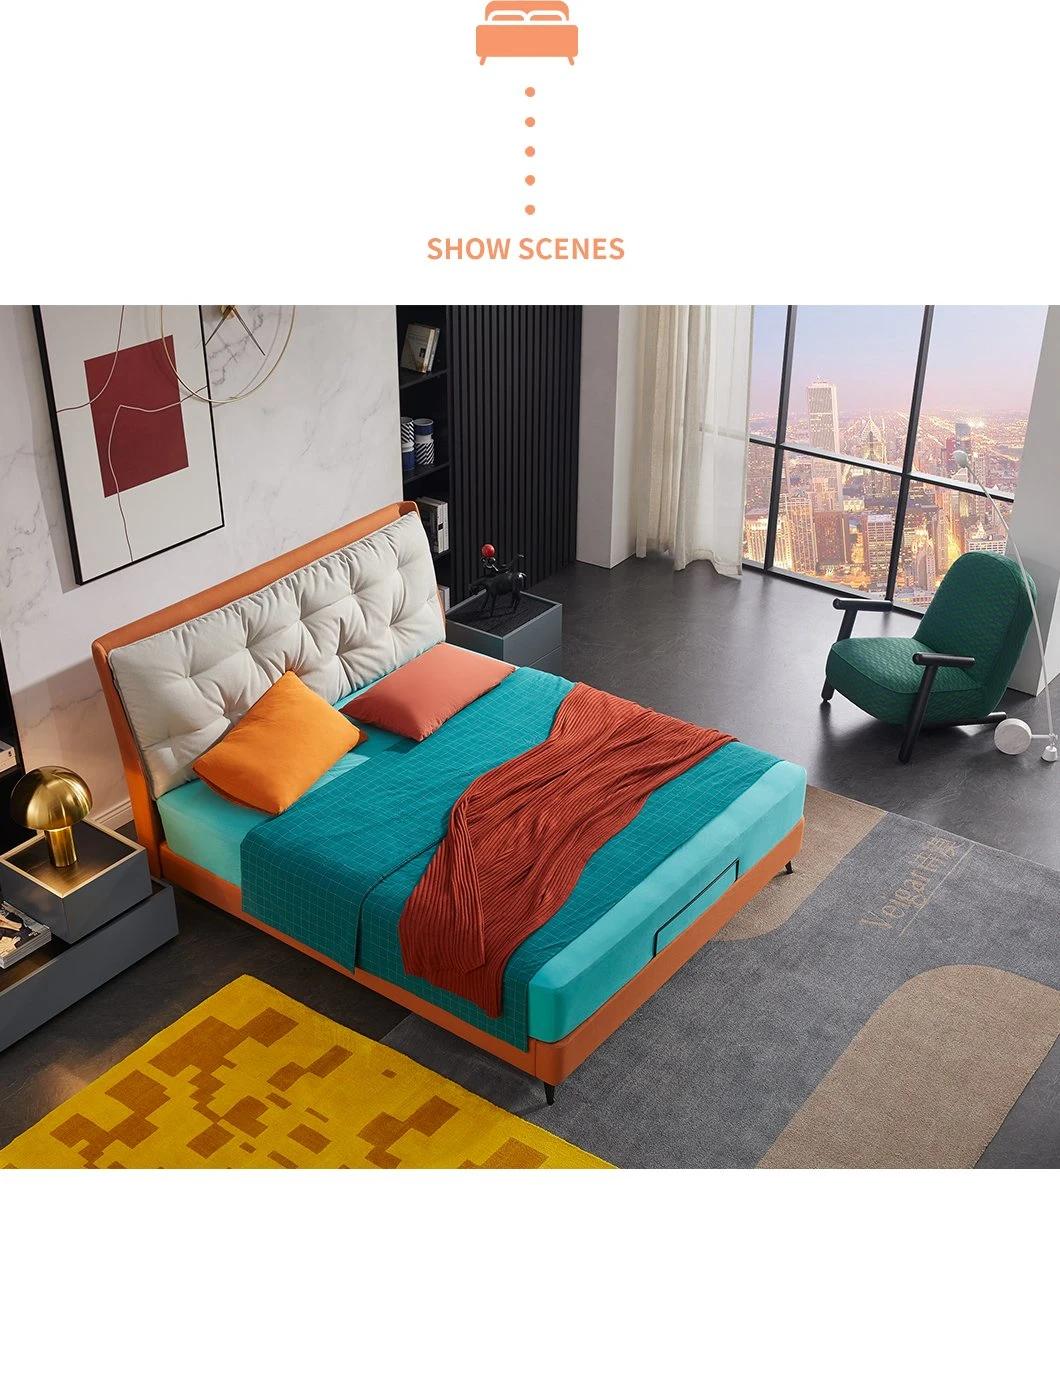 New Technology Fabric Bed Modern Bedroom Furniture